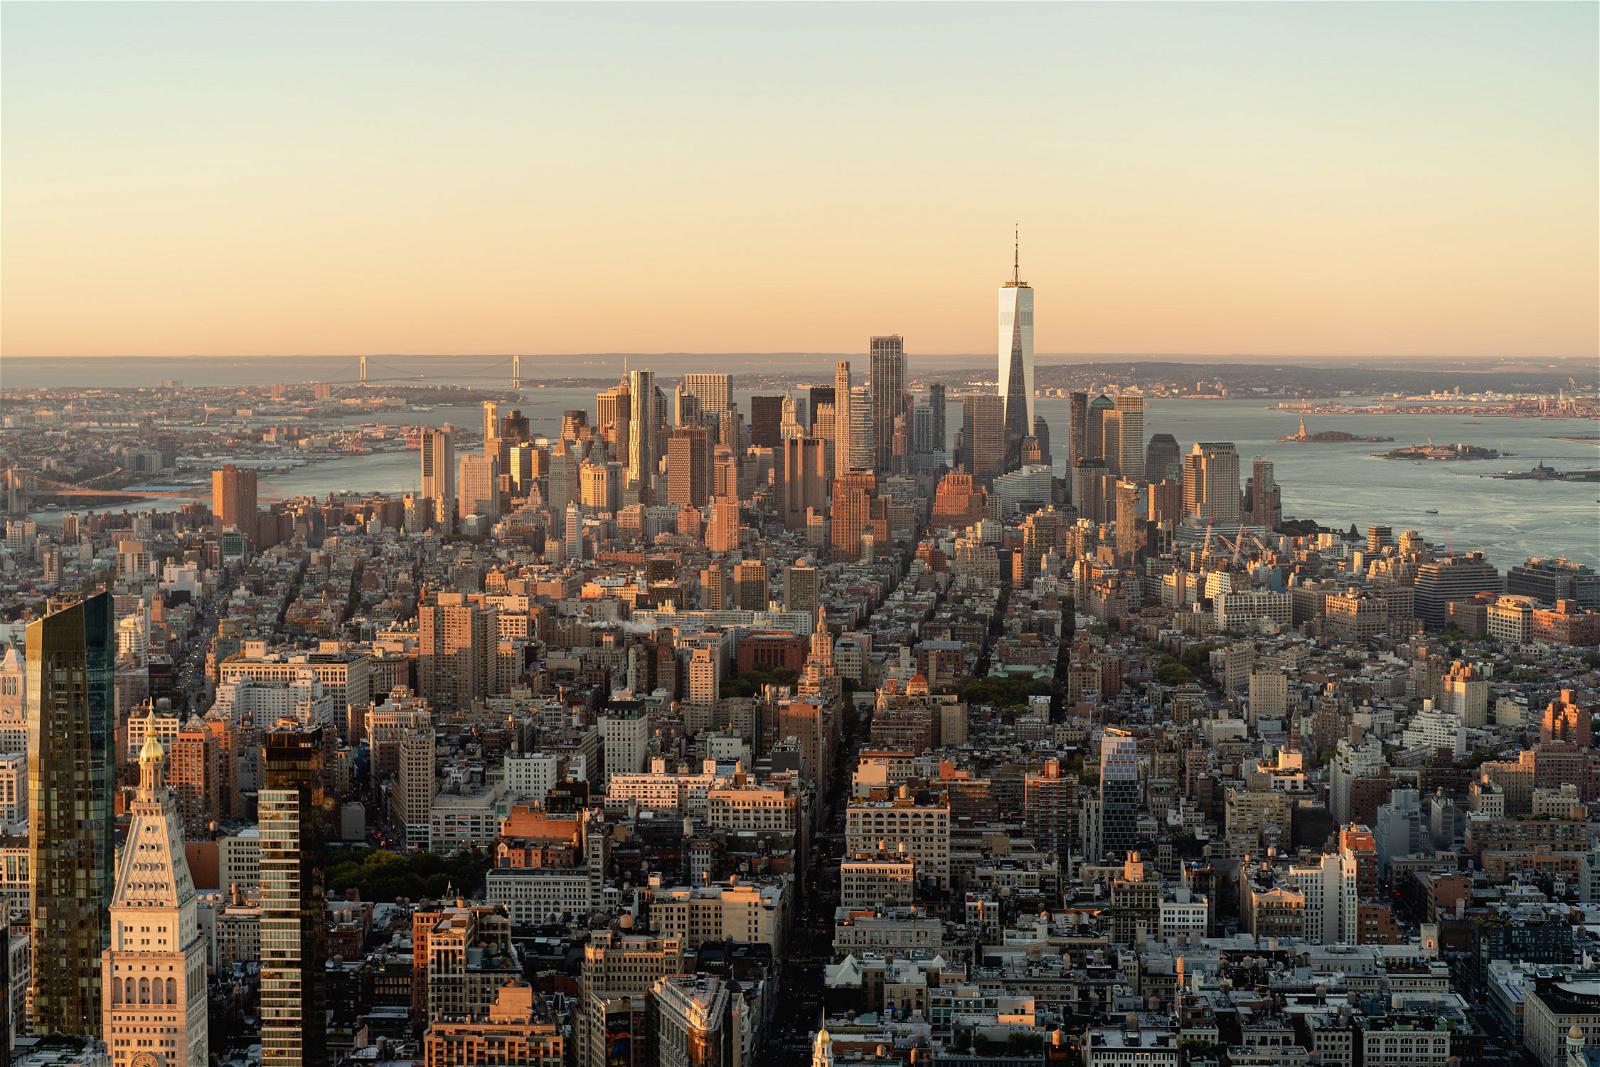 Photos of Sunrise at the Empire State Building Observation Deck